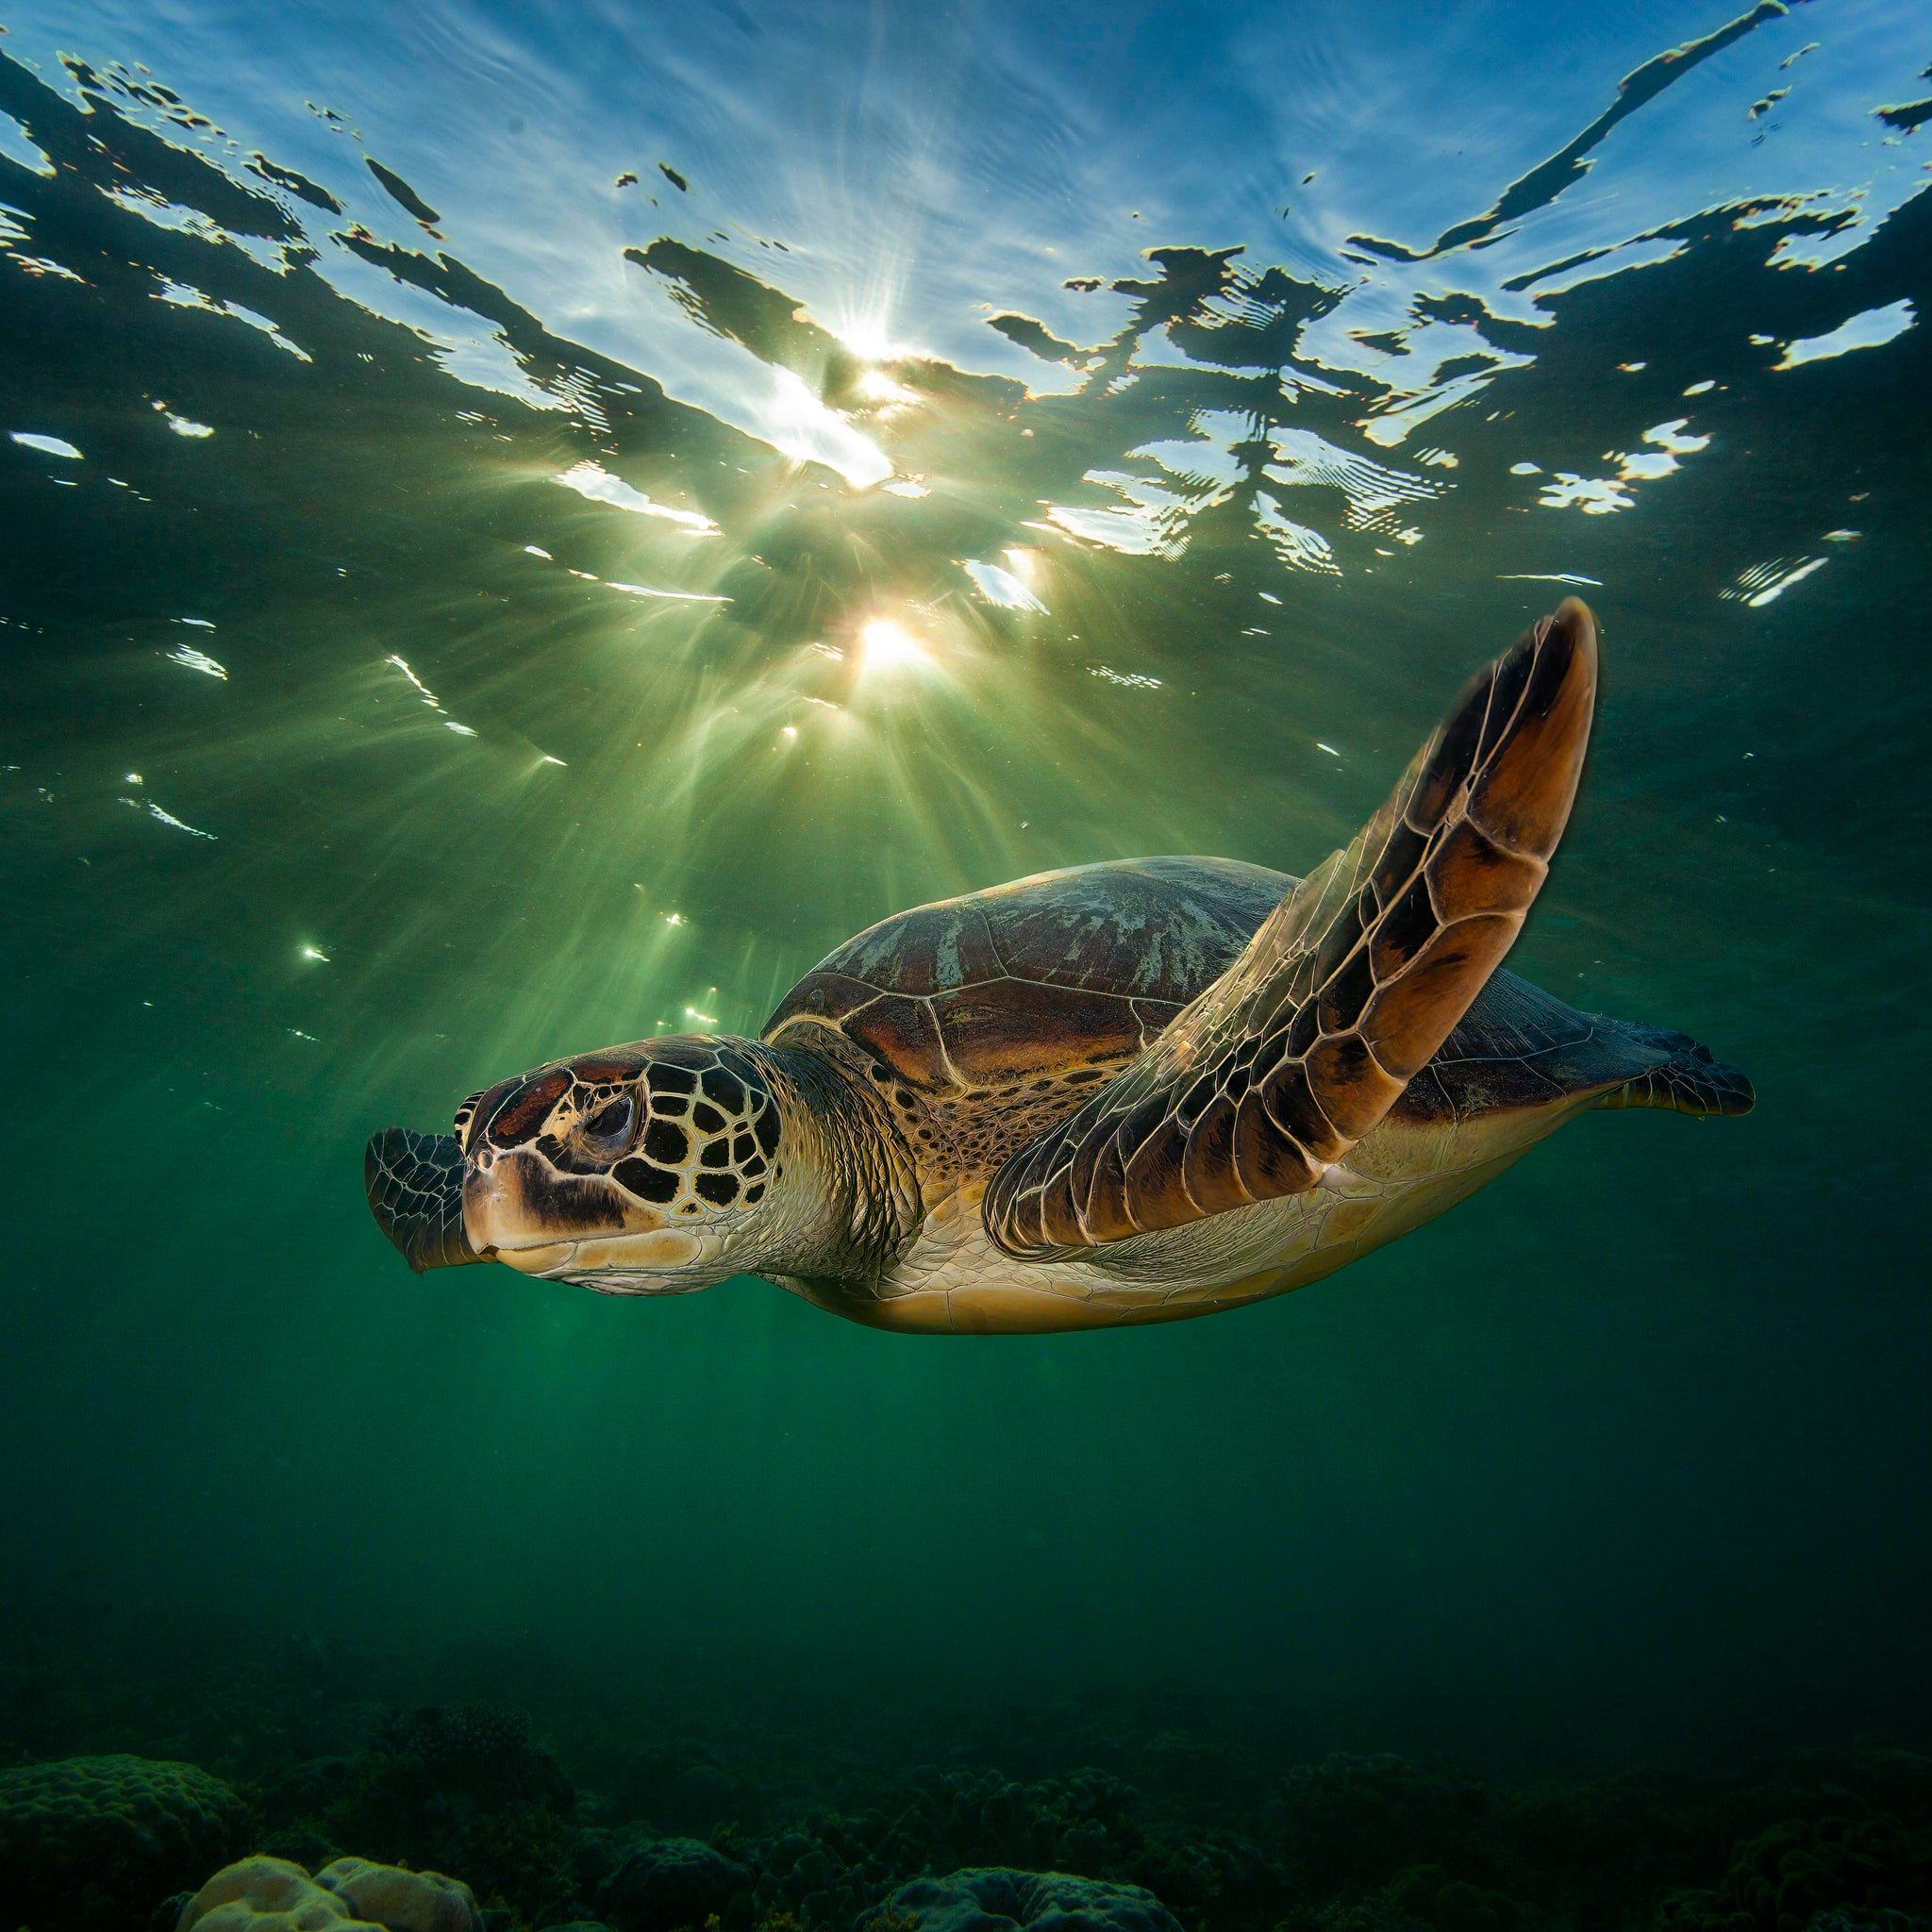 Green Turtle in a Golden Sunset